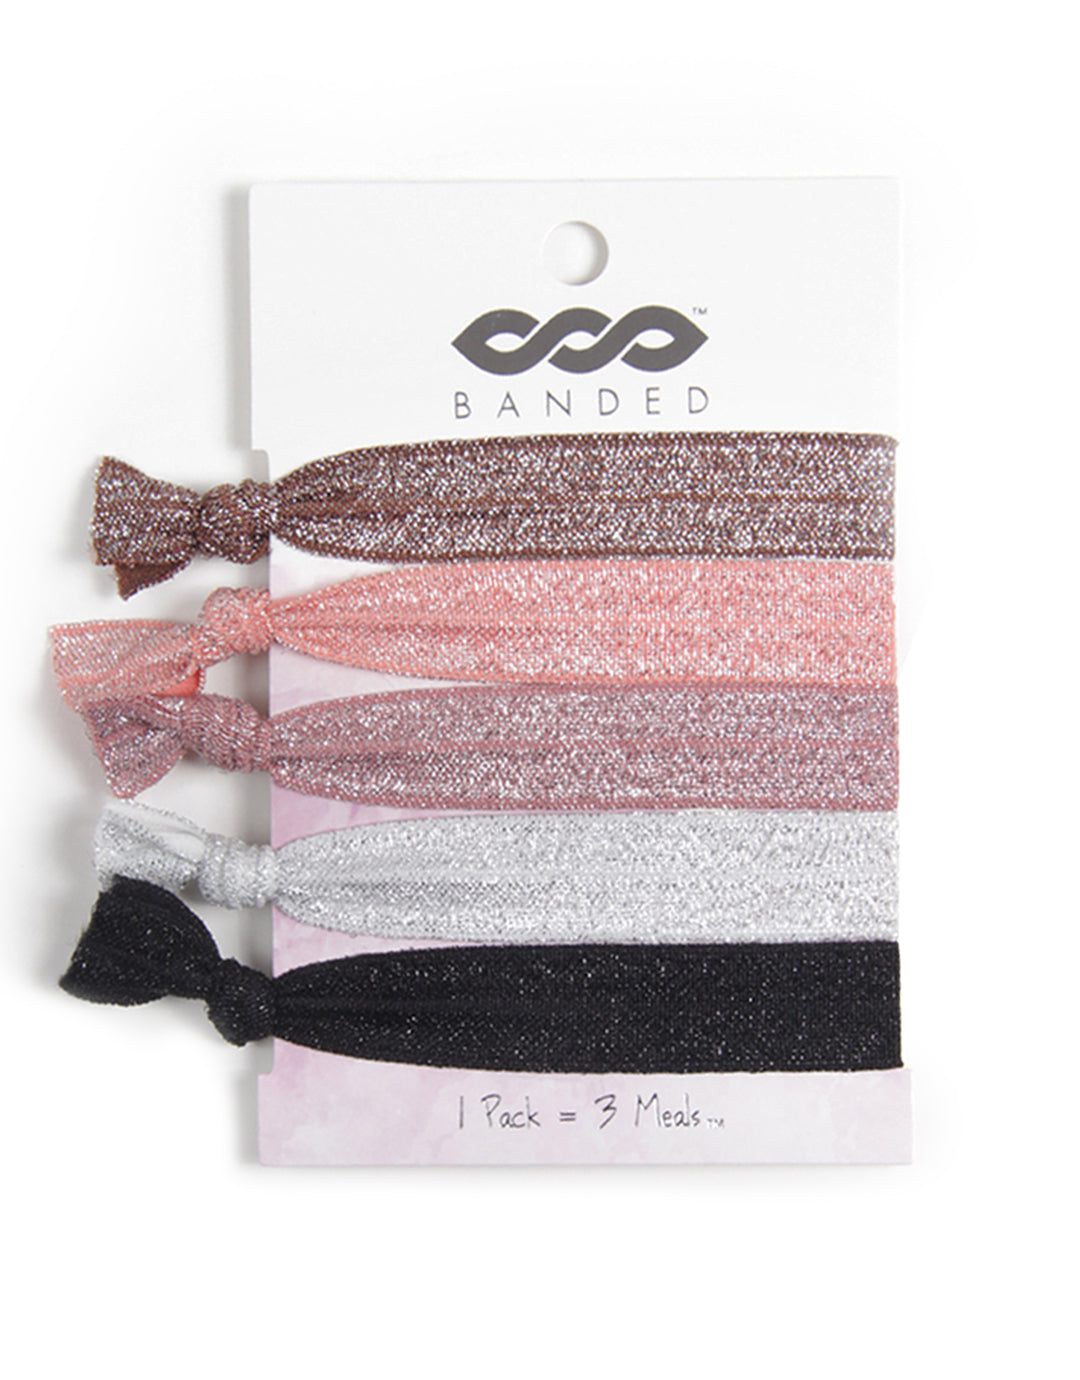 BANDED Women’s Hair Ties + Accessories - Neutral Shimmer - Classic Hair Tie Pack